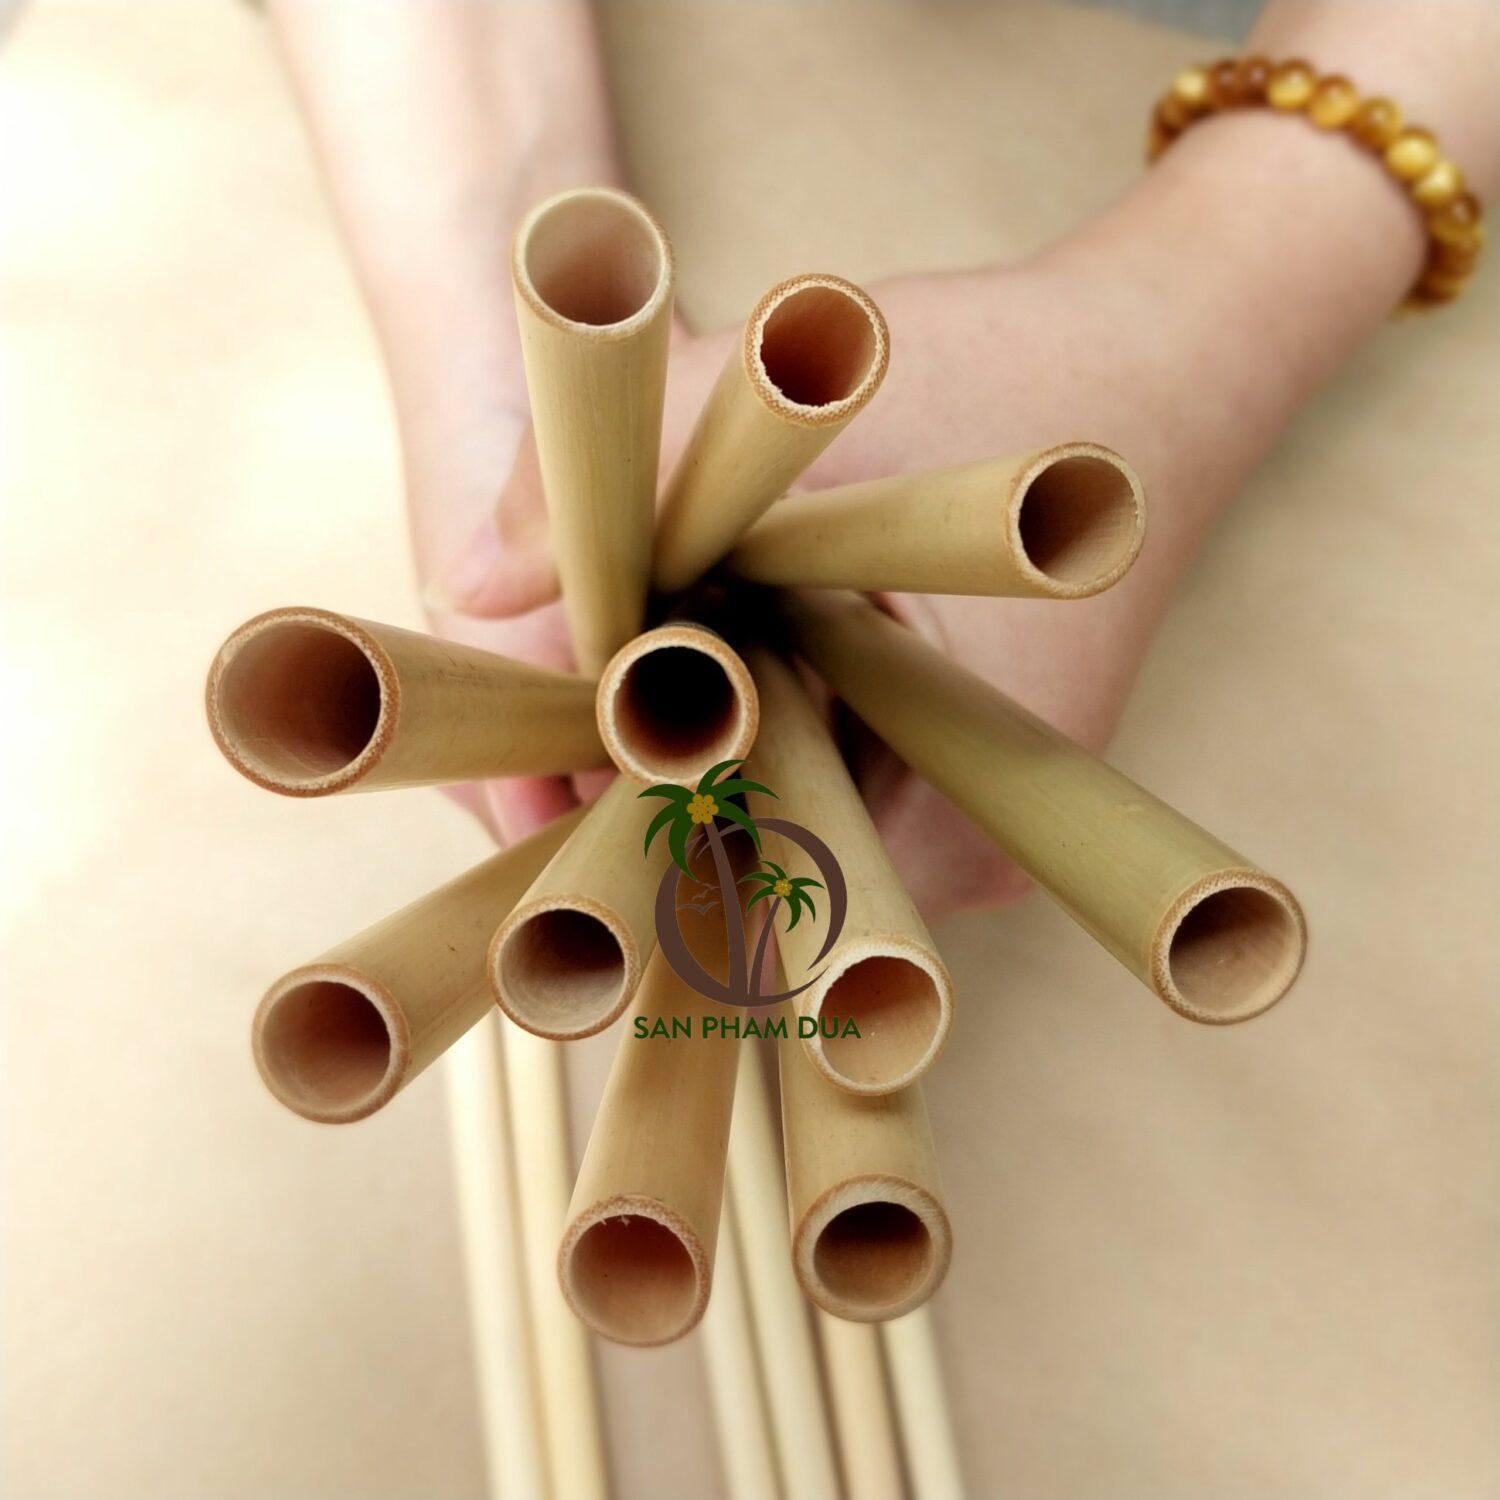 WHY SHOULD USE BAMBOO STRAWS IN STEAD OF PLASTIC STRAWS?